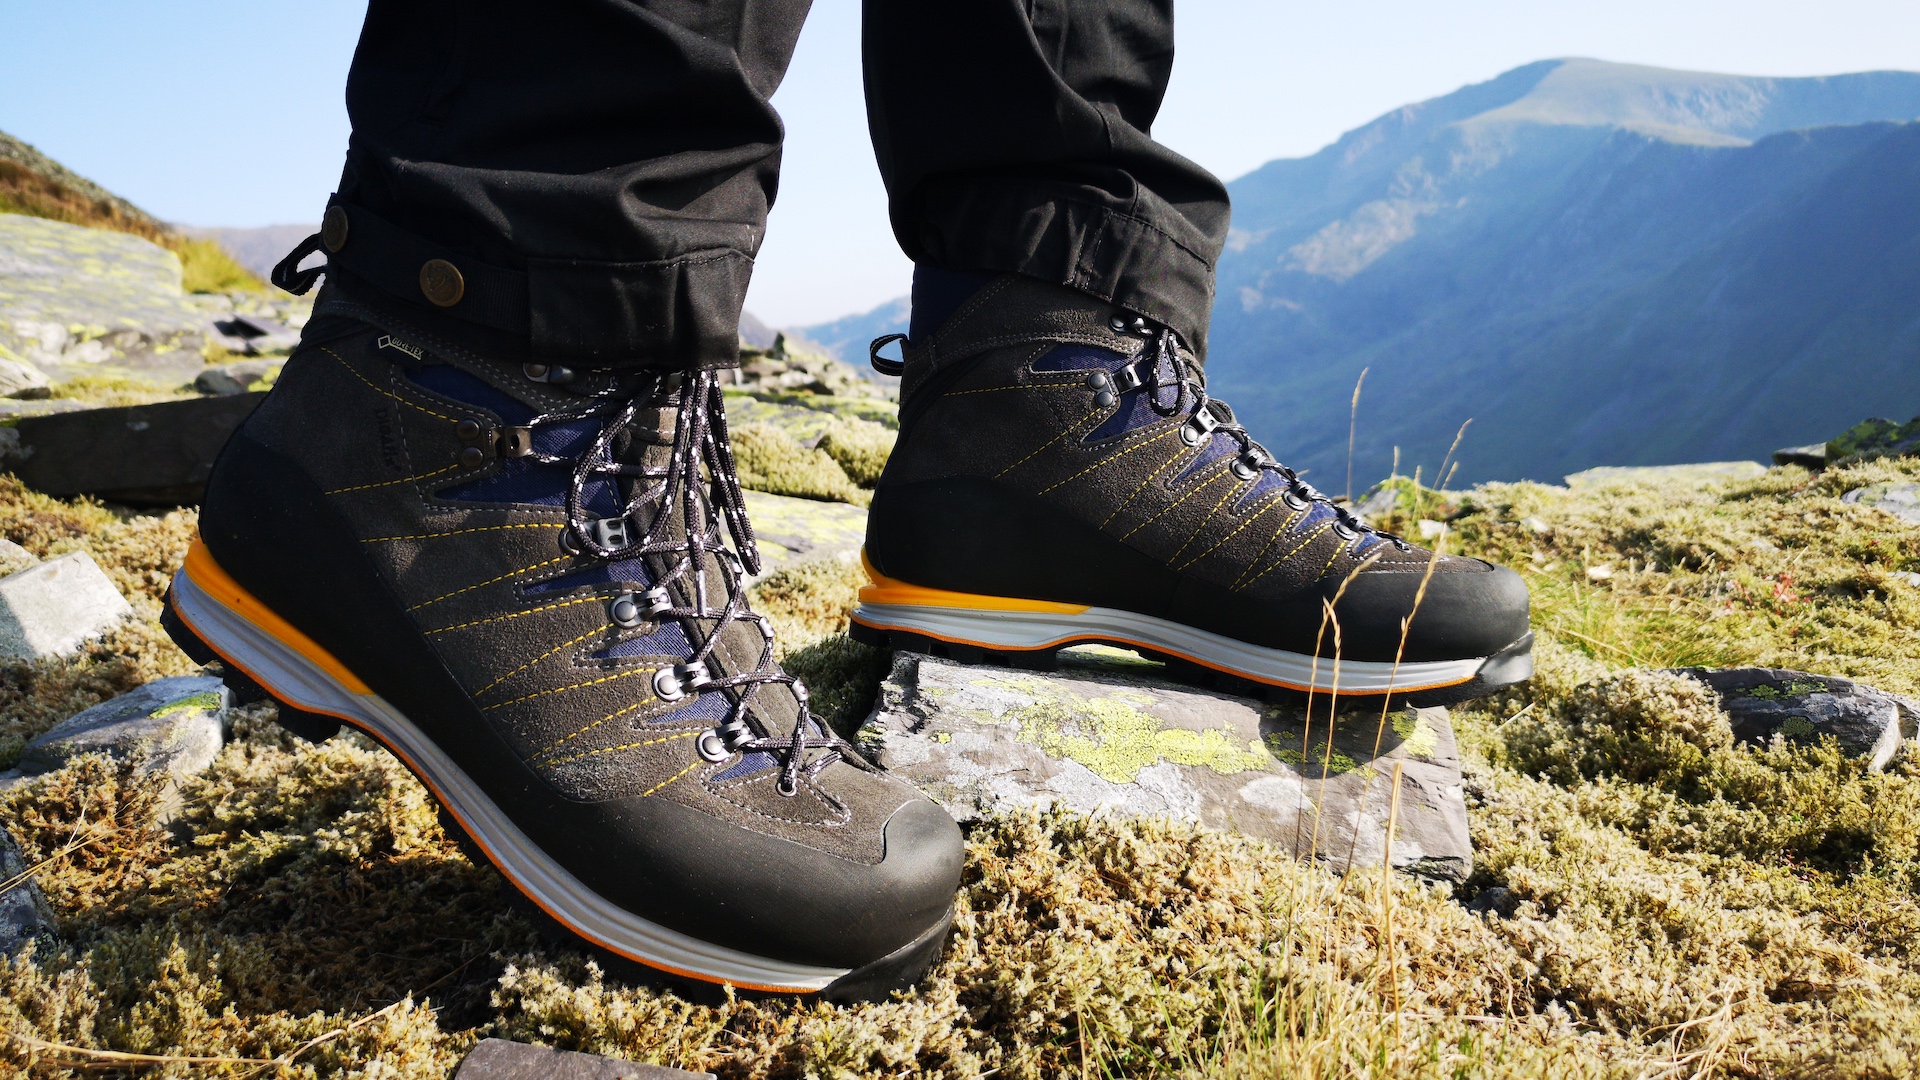 dun instinct Modernisering Meindl Air Revolution 4.1 hiking boots review: leather boot stability with  fabric boot flexibility | Advnture